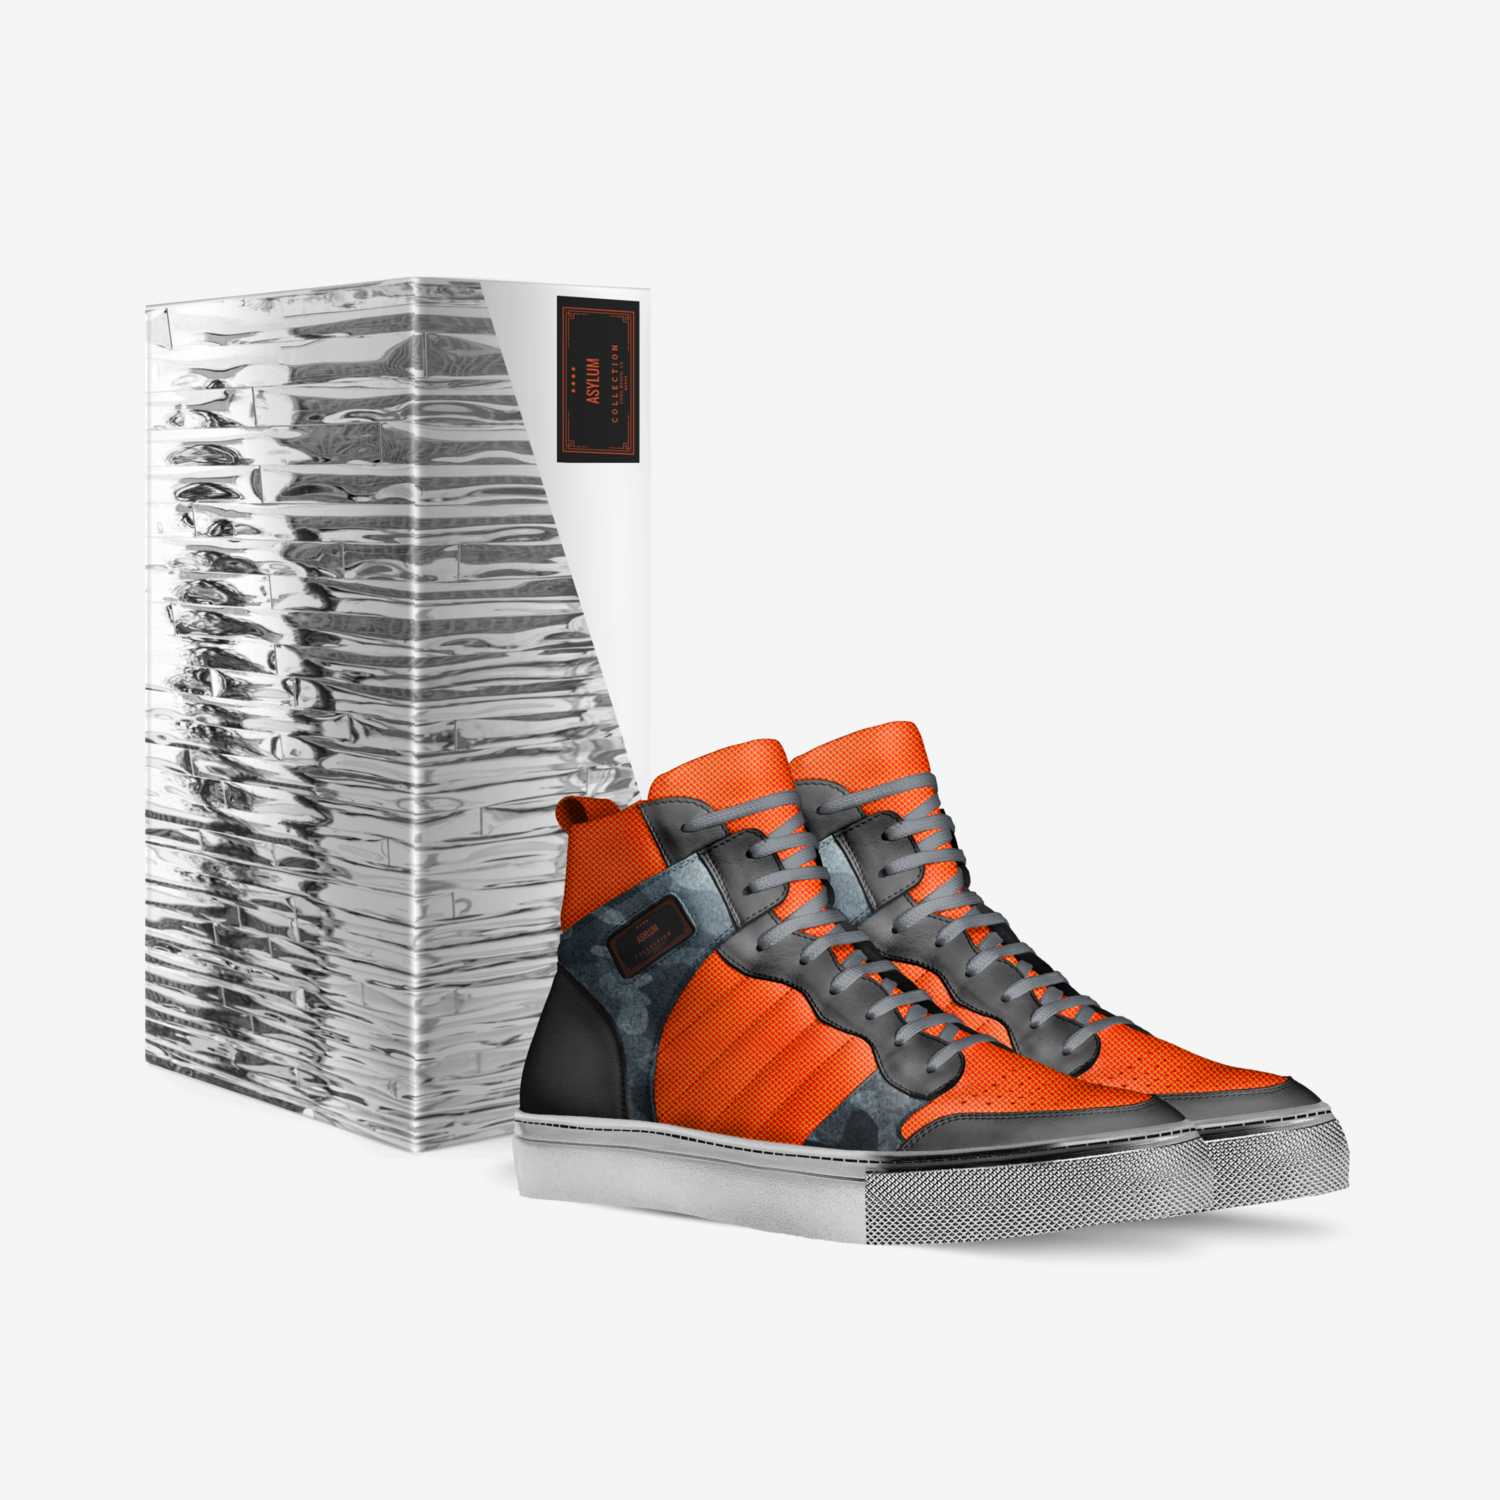 Asylum custom made in Italy shoes by Dexter Darjean | Box view